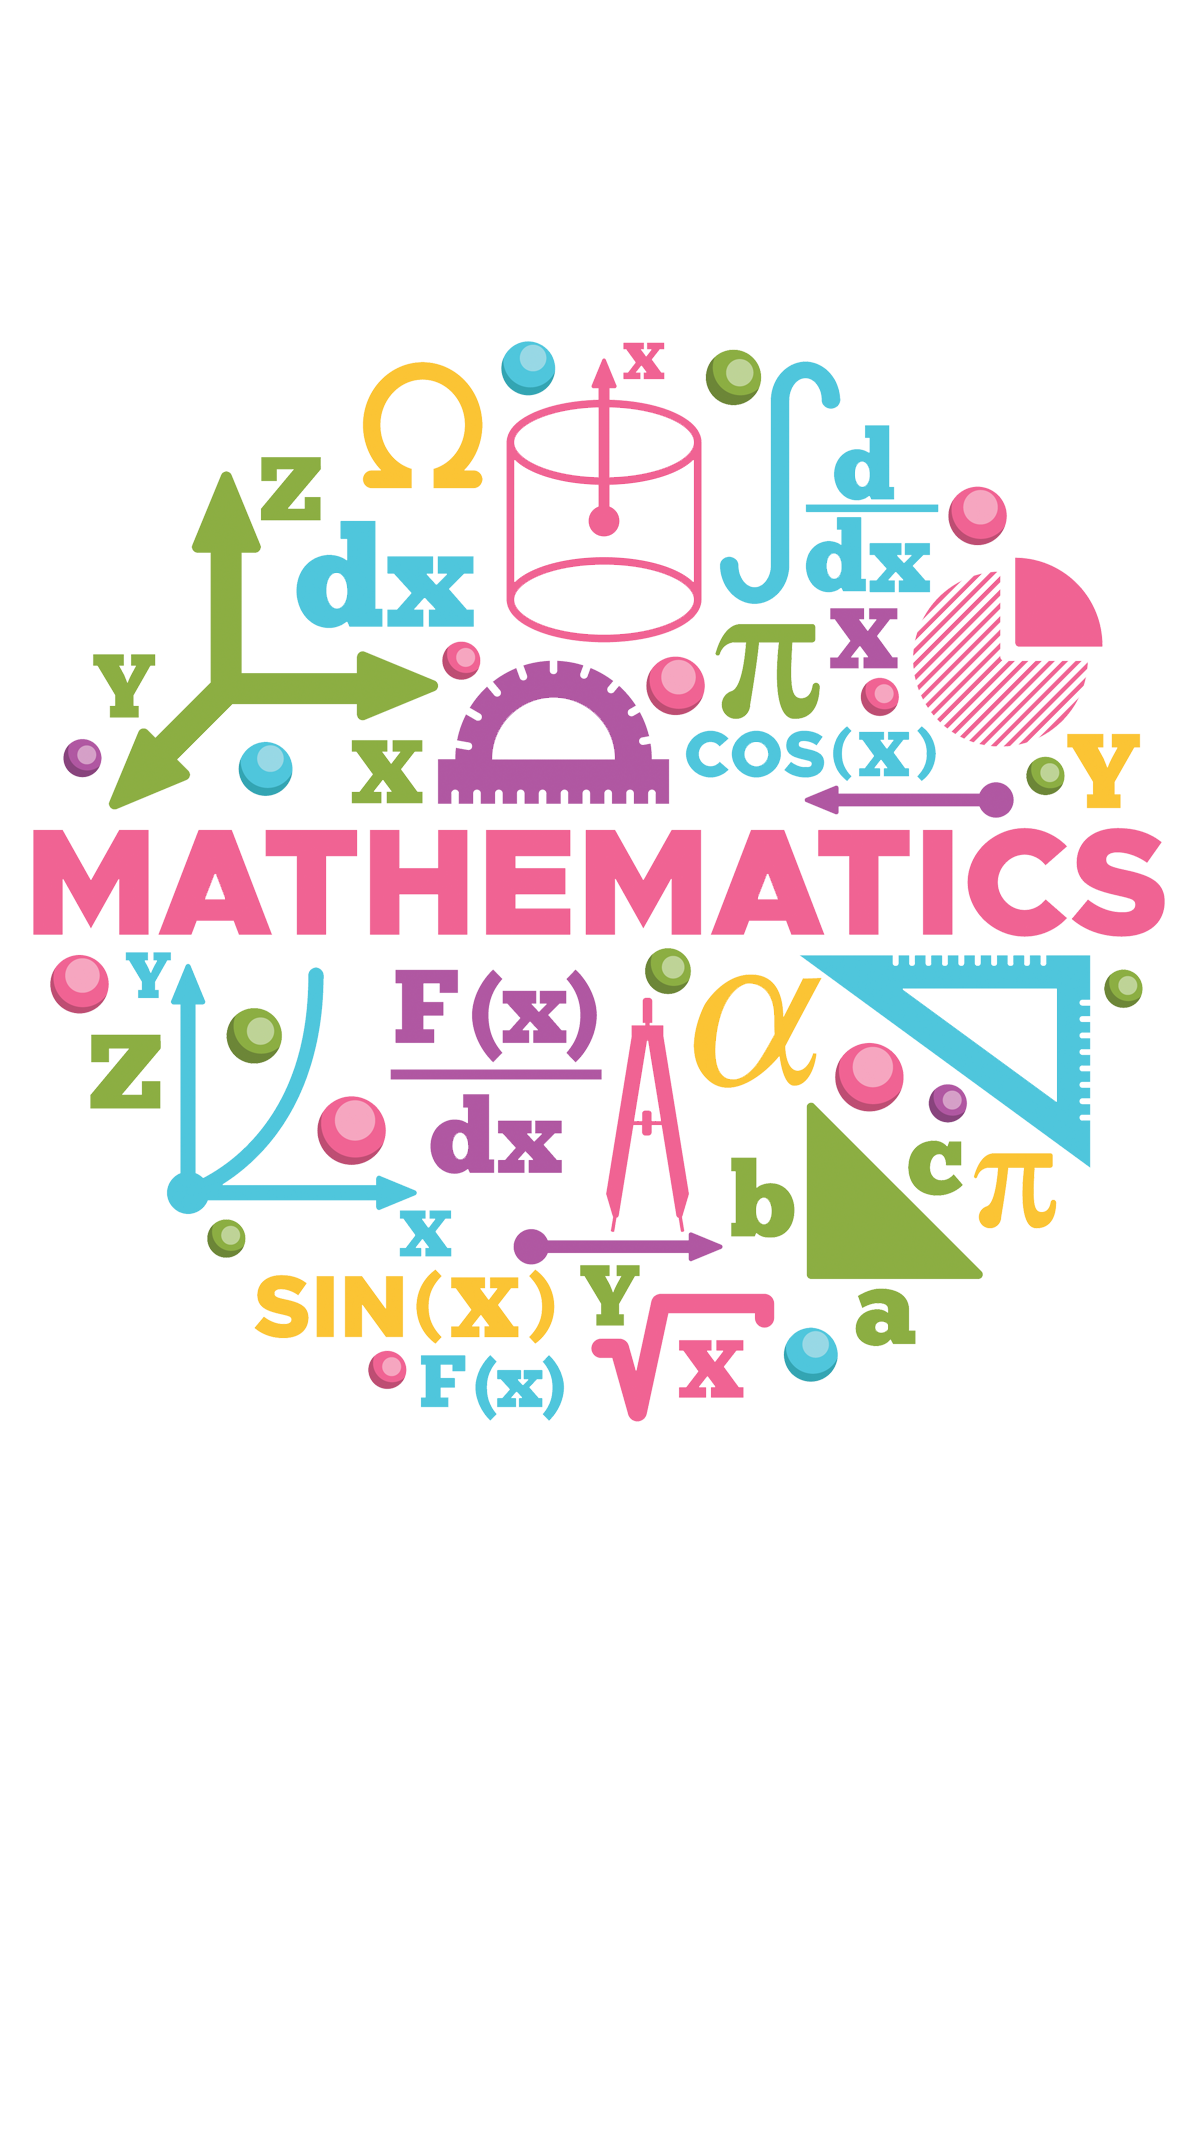 Math PNG Background